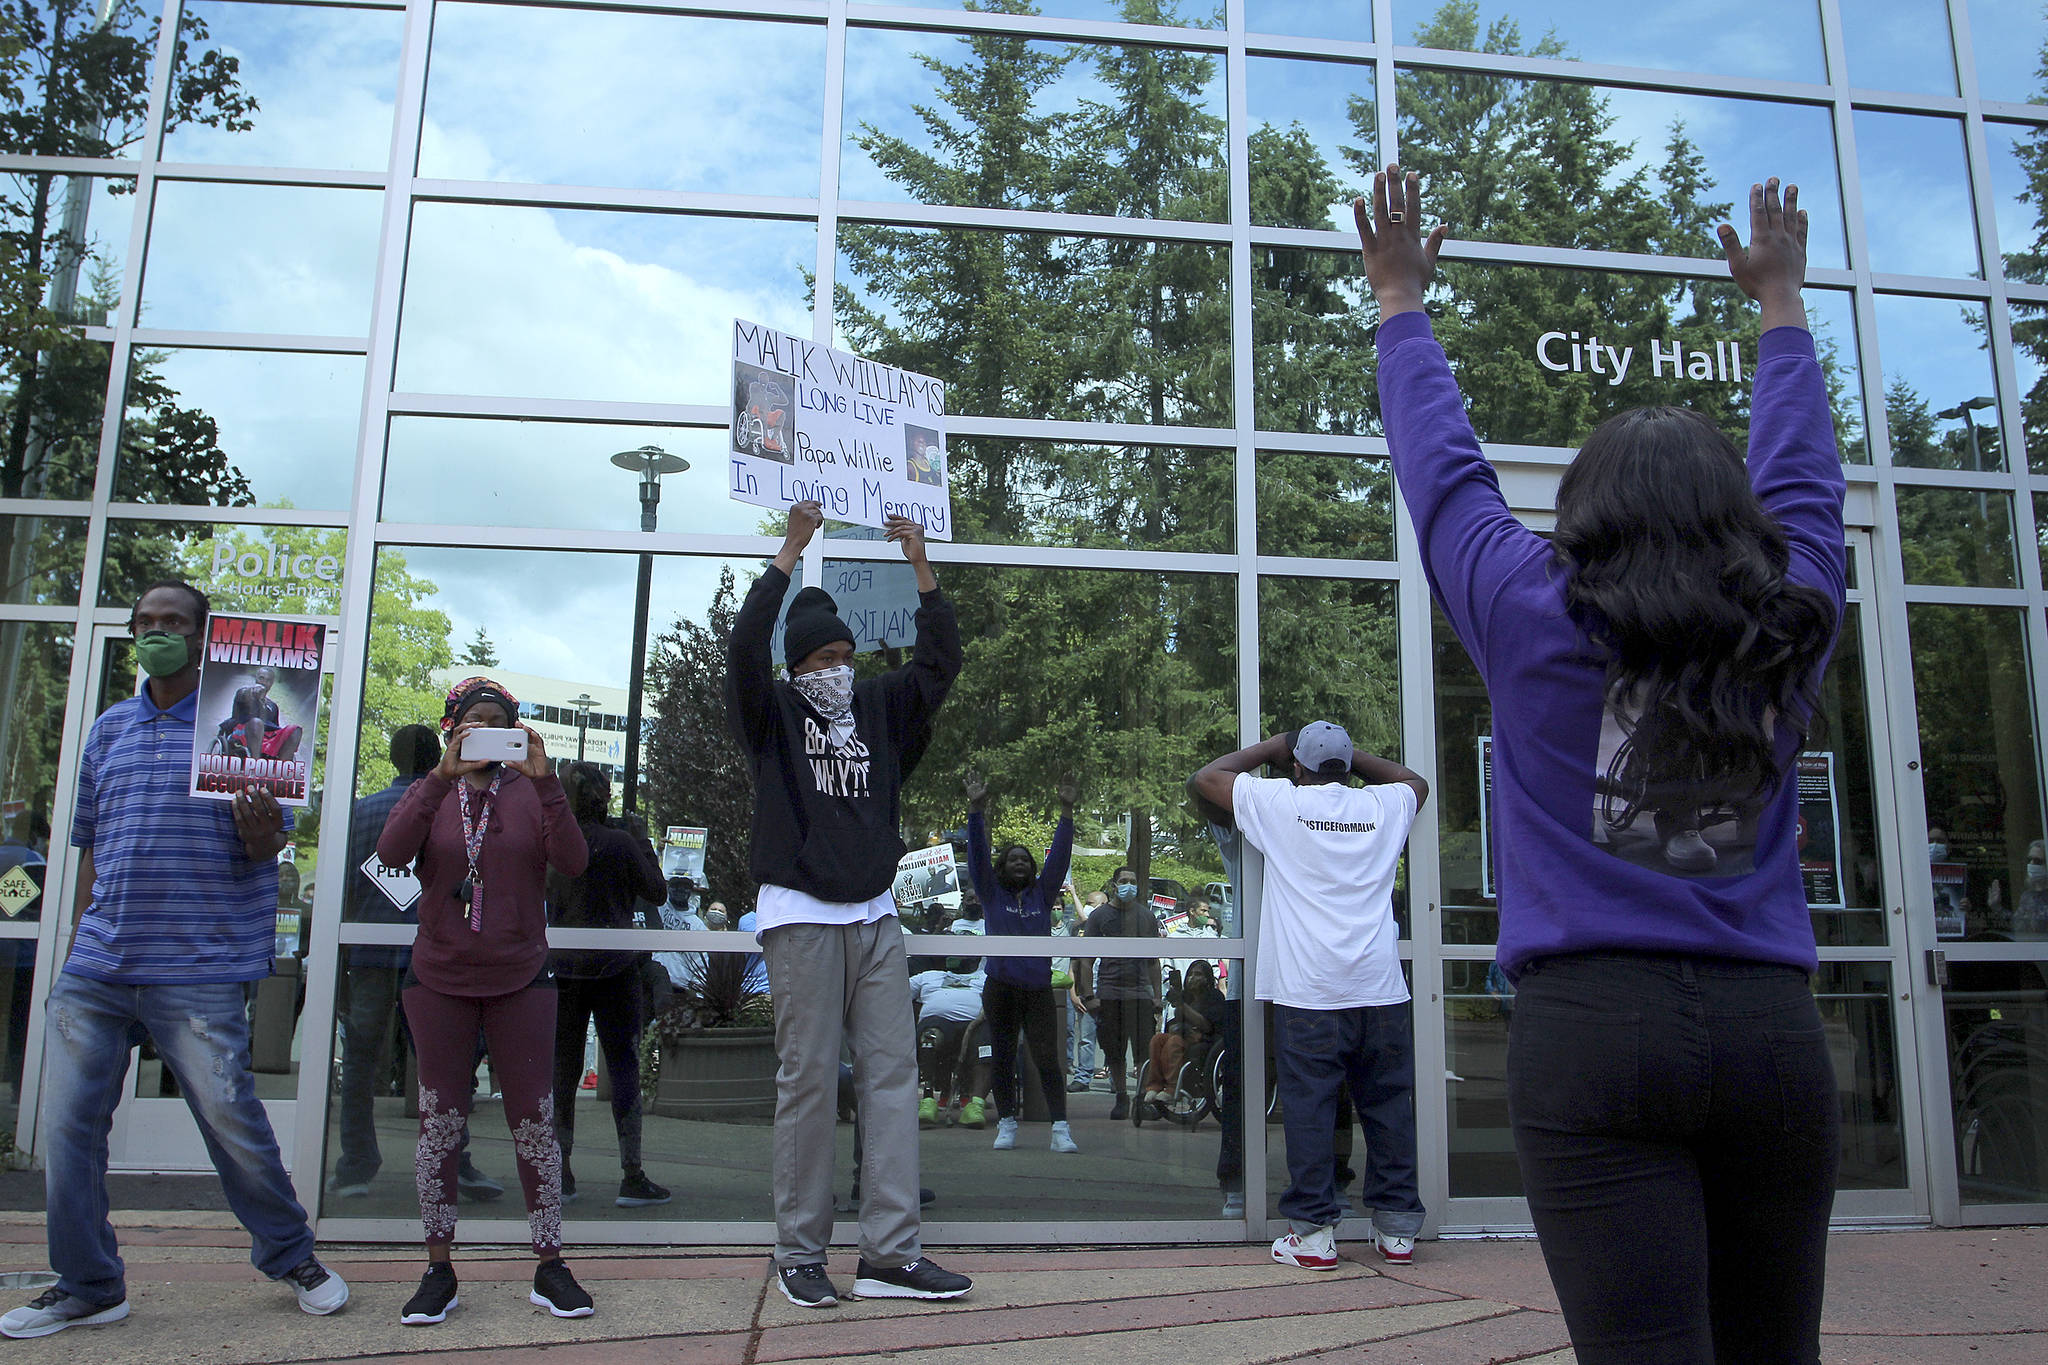 Monique Phelps raises her hands and chants “hands up, don’t shoot” at Federal Way City Hall on June 28. Olivia Sullivan/staff photo